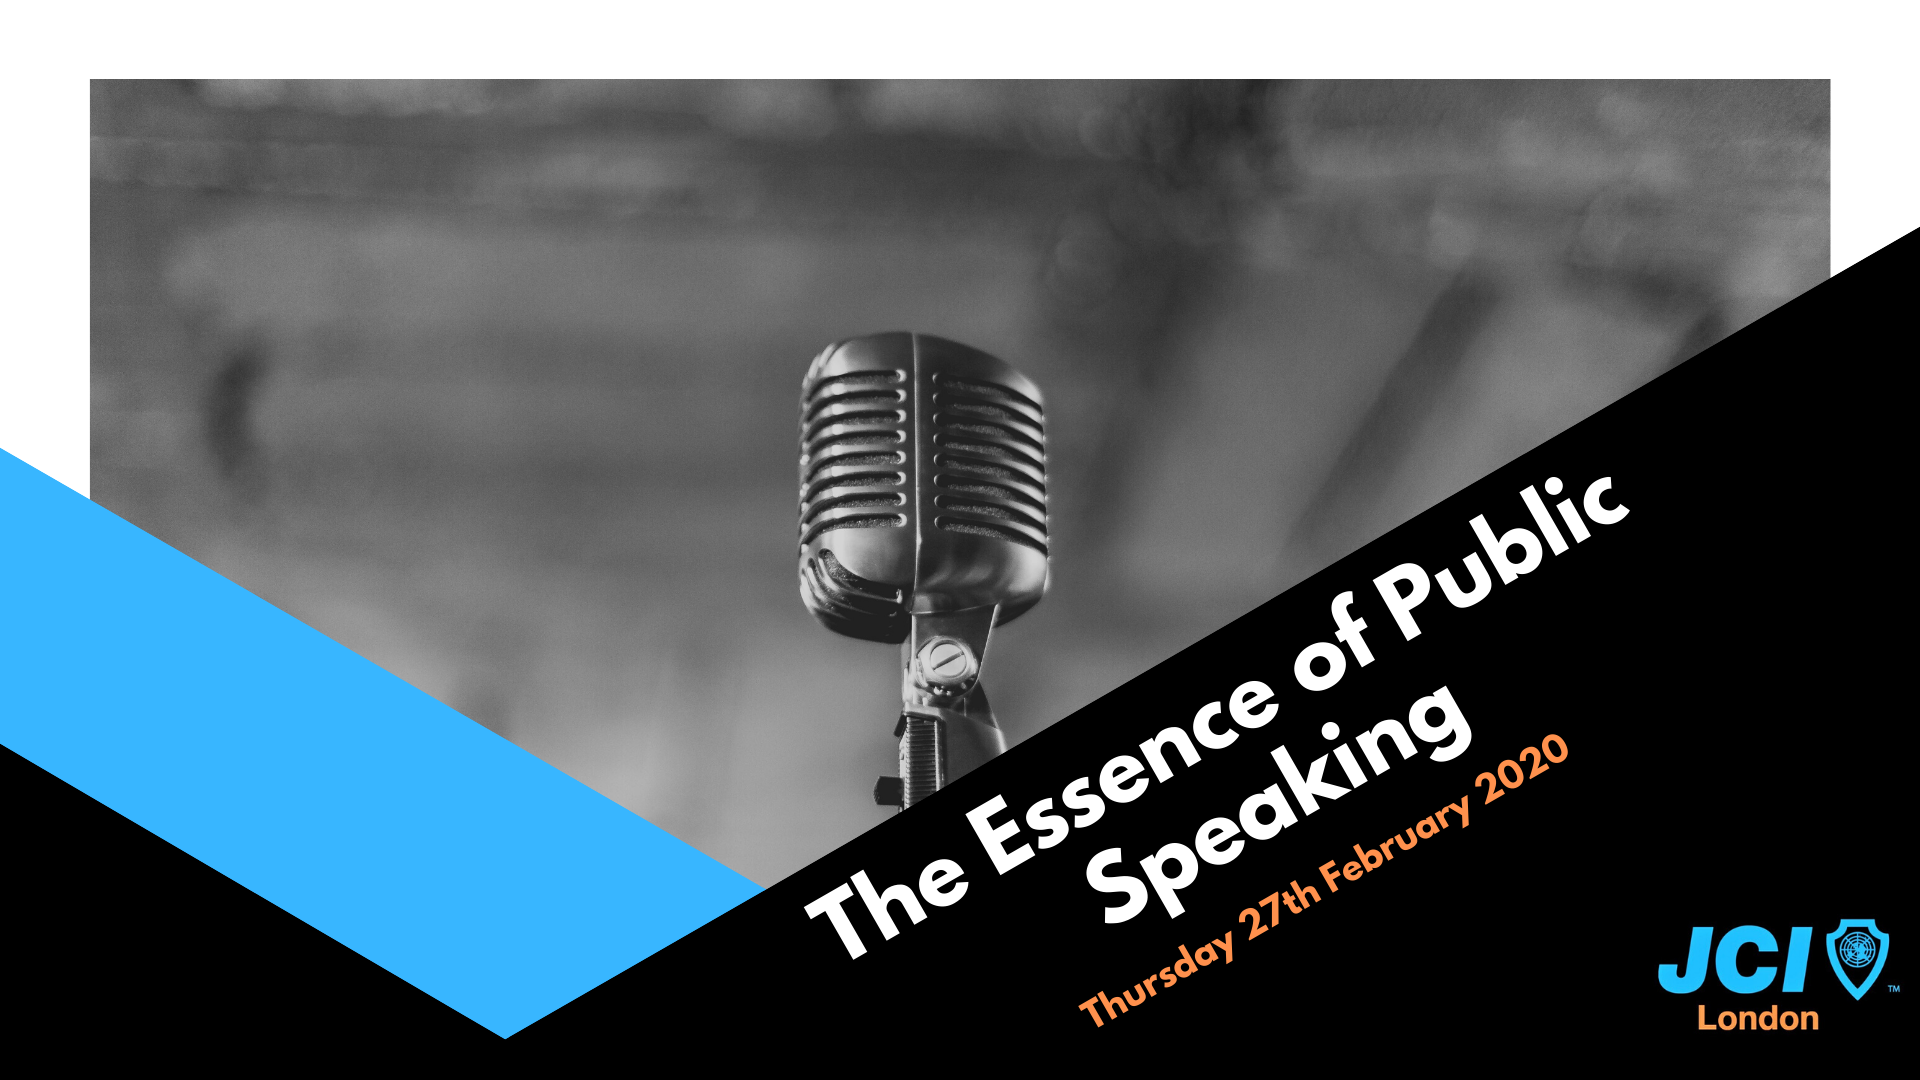 Member Stories: The Essence of Public Speaking